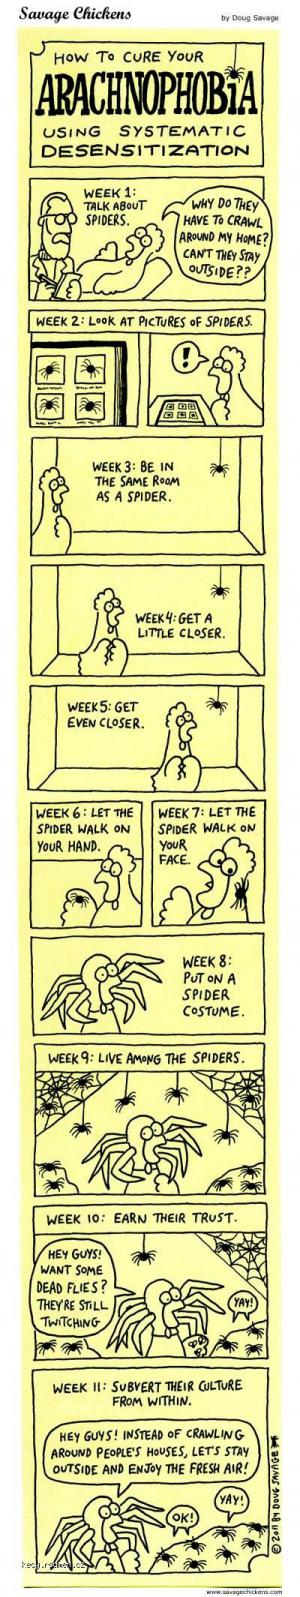 how to cure your arachnophobia